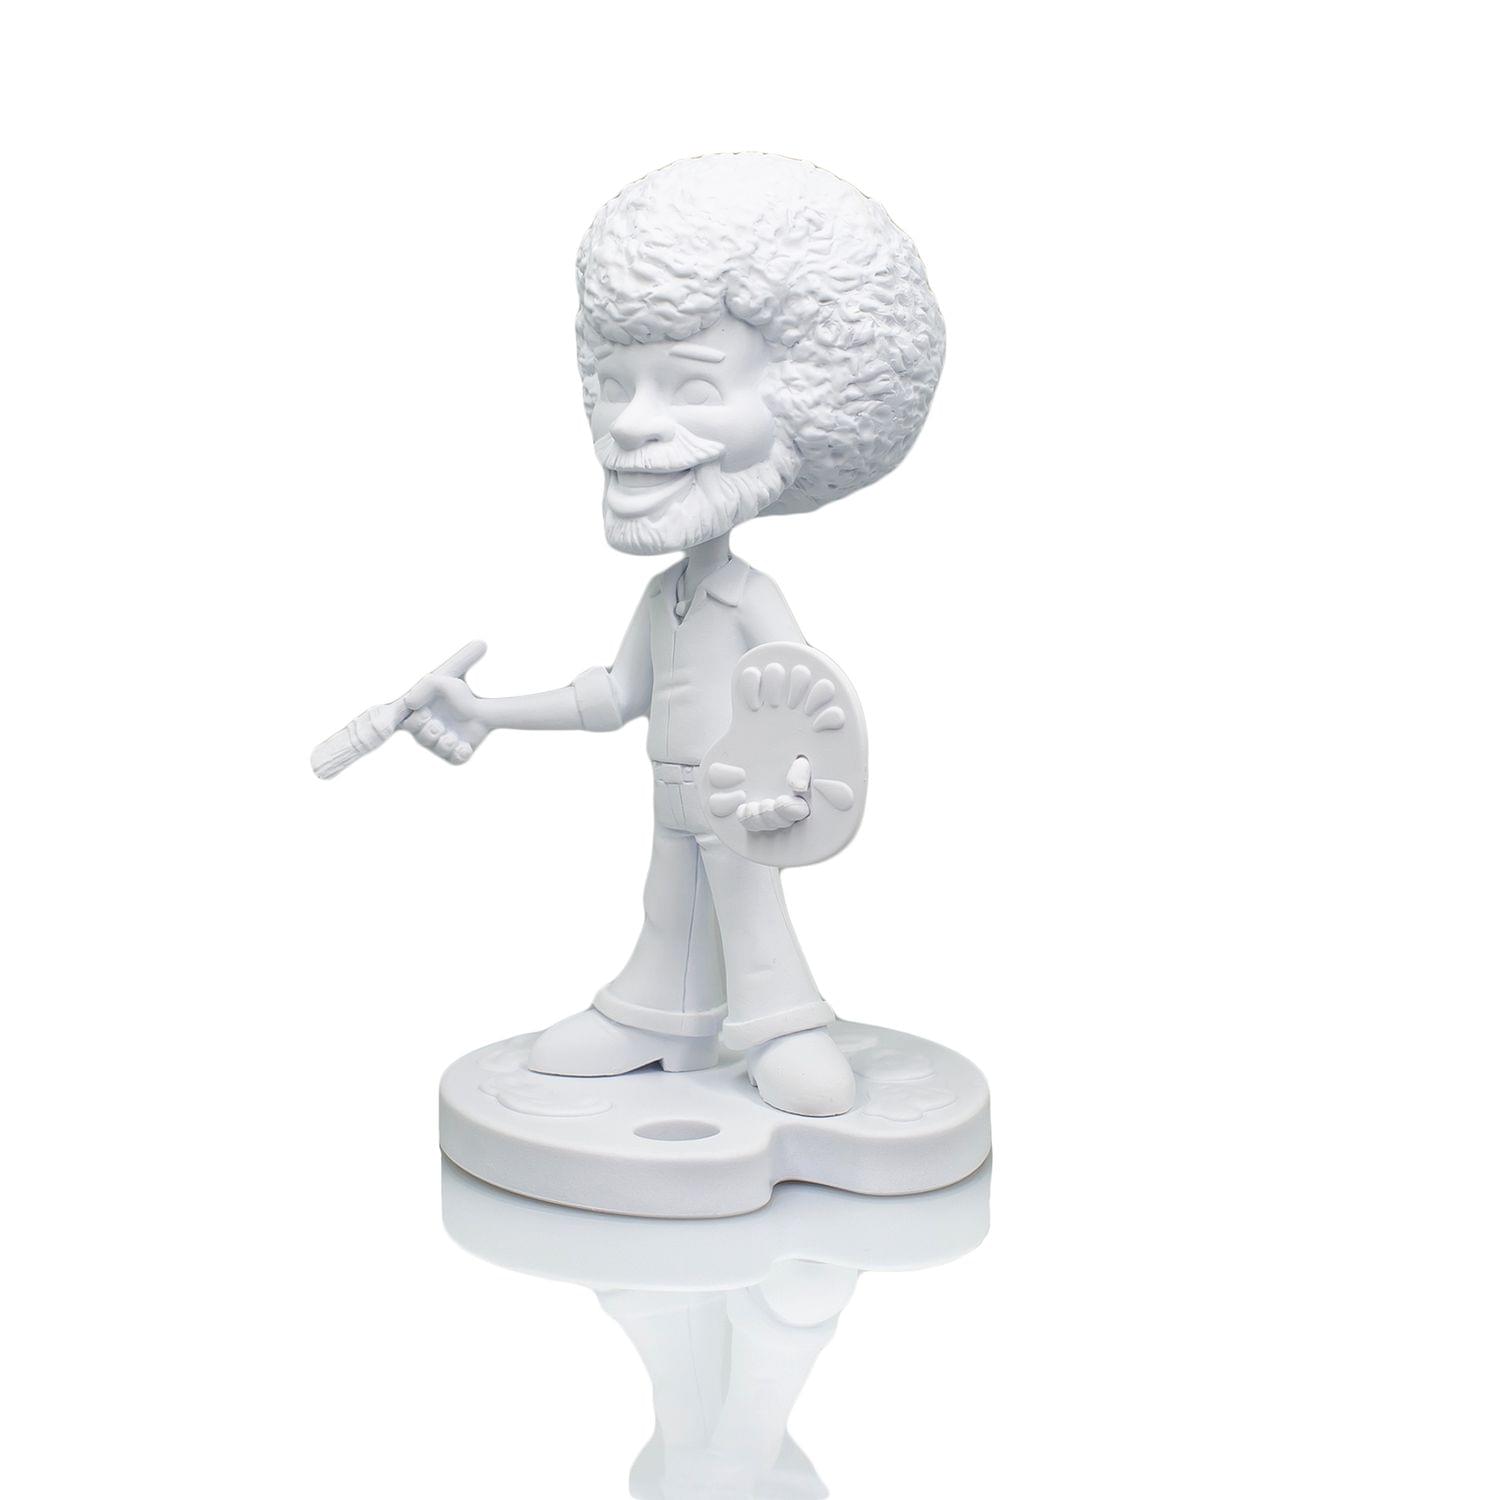 TOONIES "PAINT YOUR OWN" BOB ROSS 6.5" VINYL FIGURE COLLECTIBLE | WHITE VARIANT